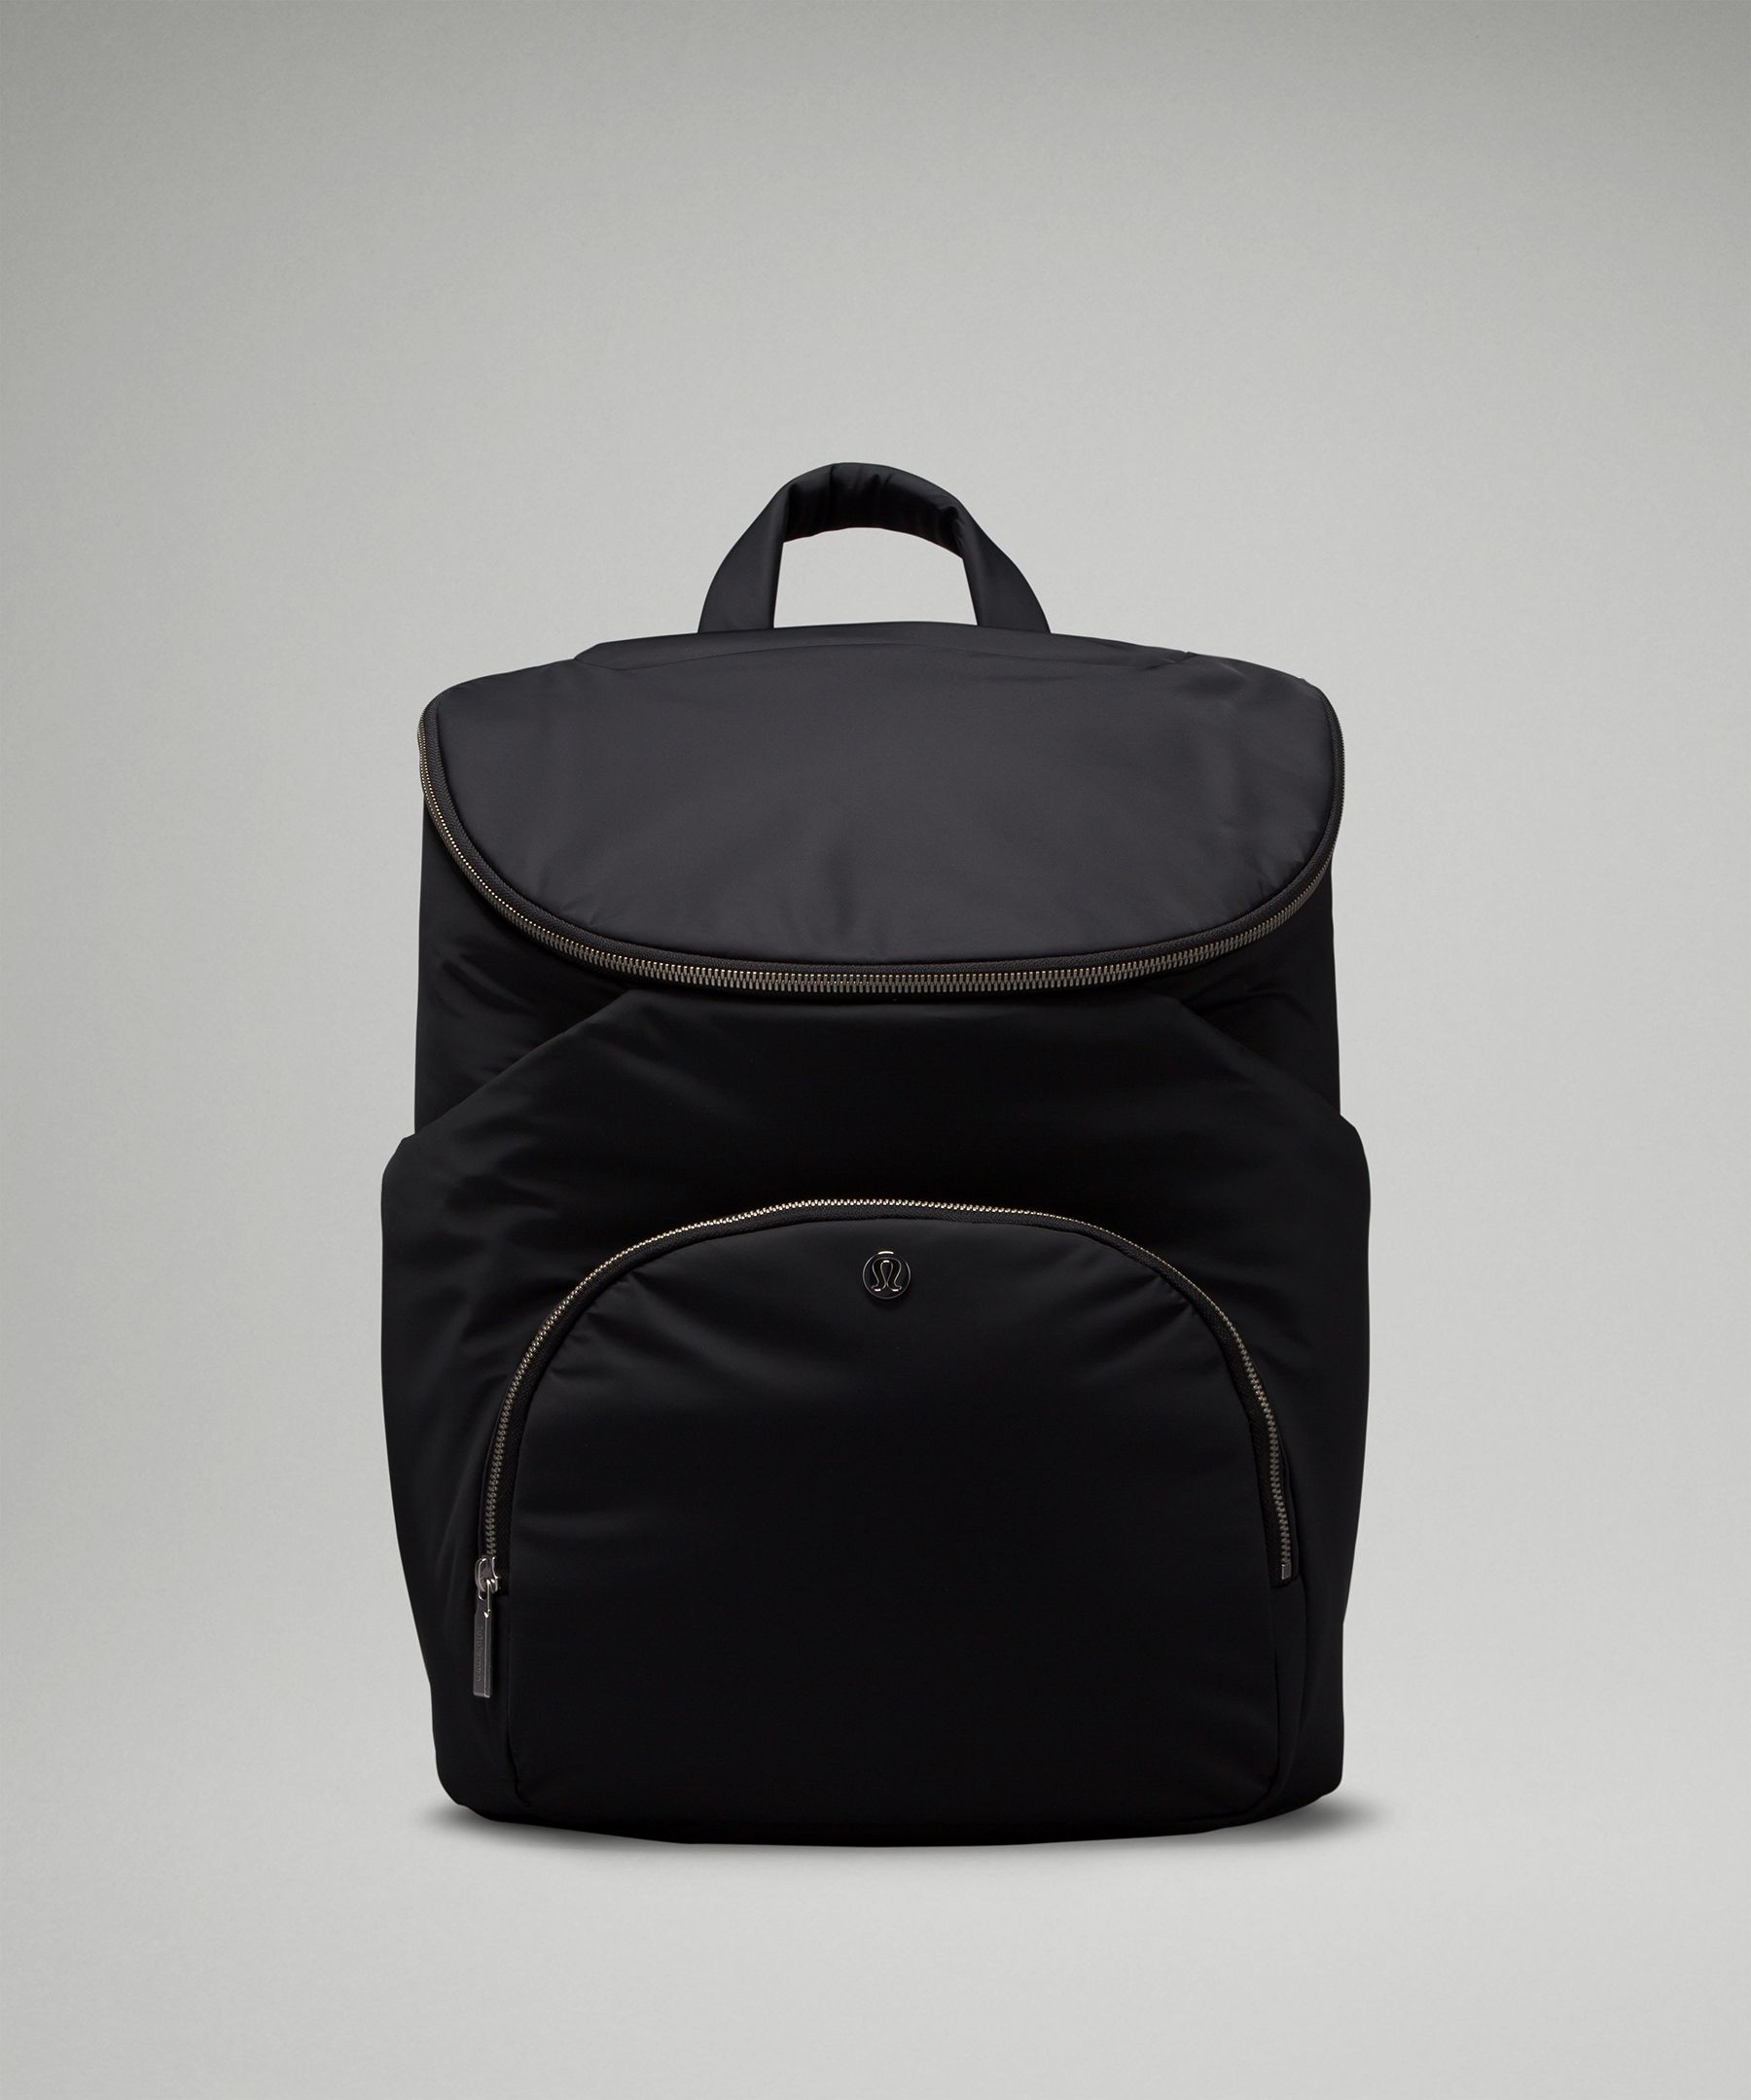 lululemon 'We Made Too Much' restock: Stock up on these backpack